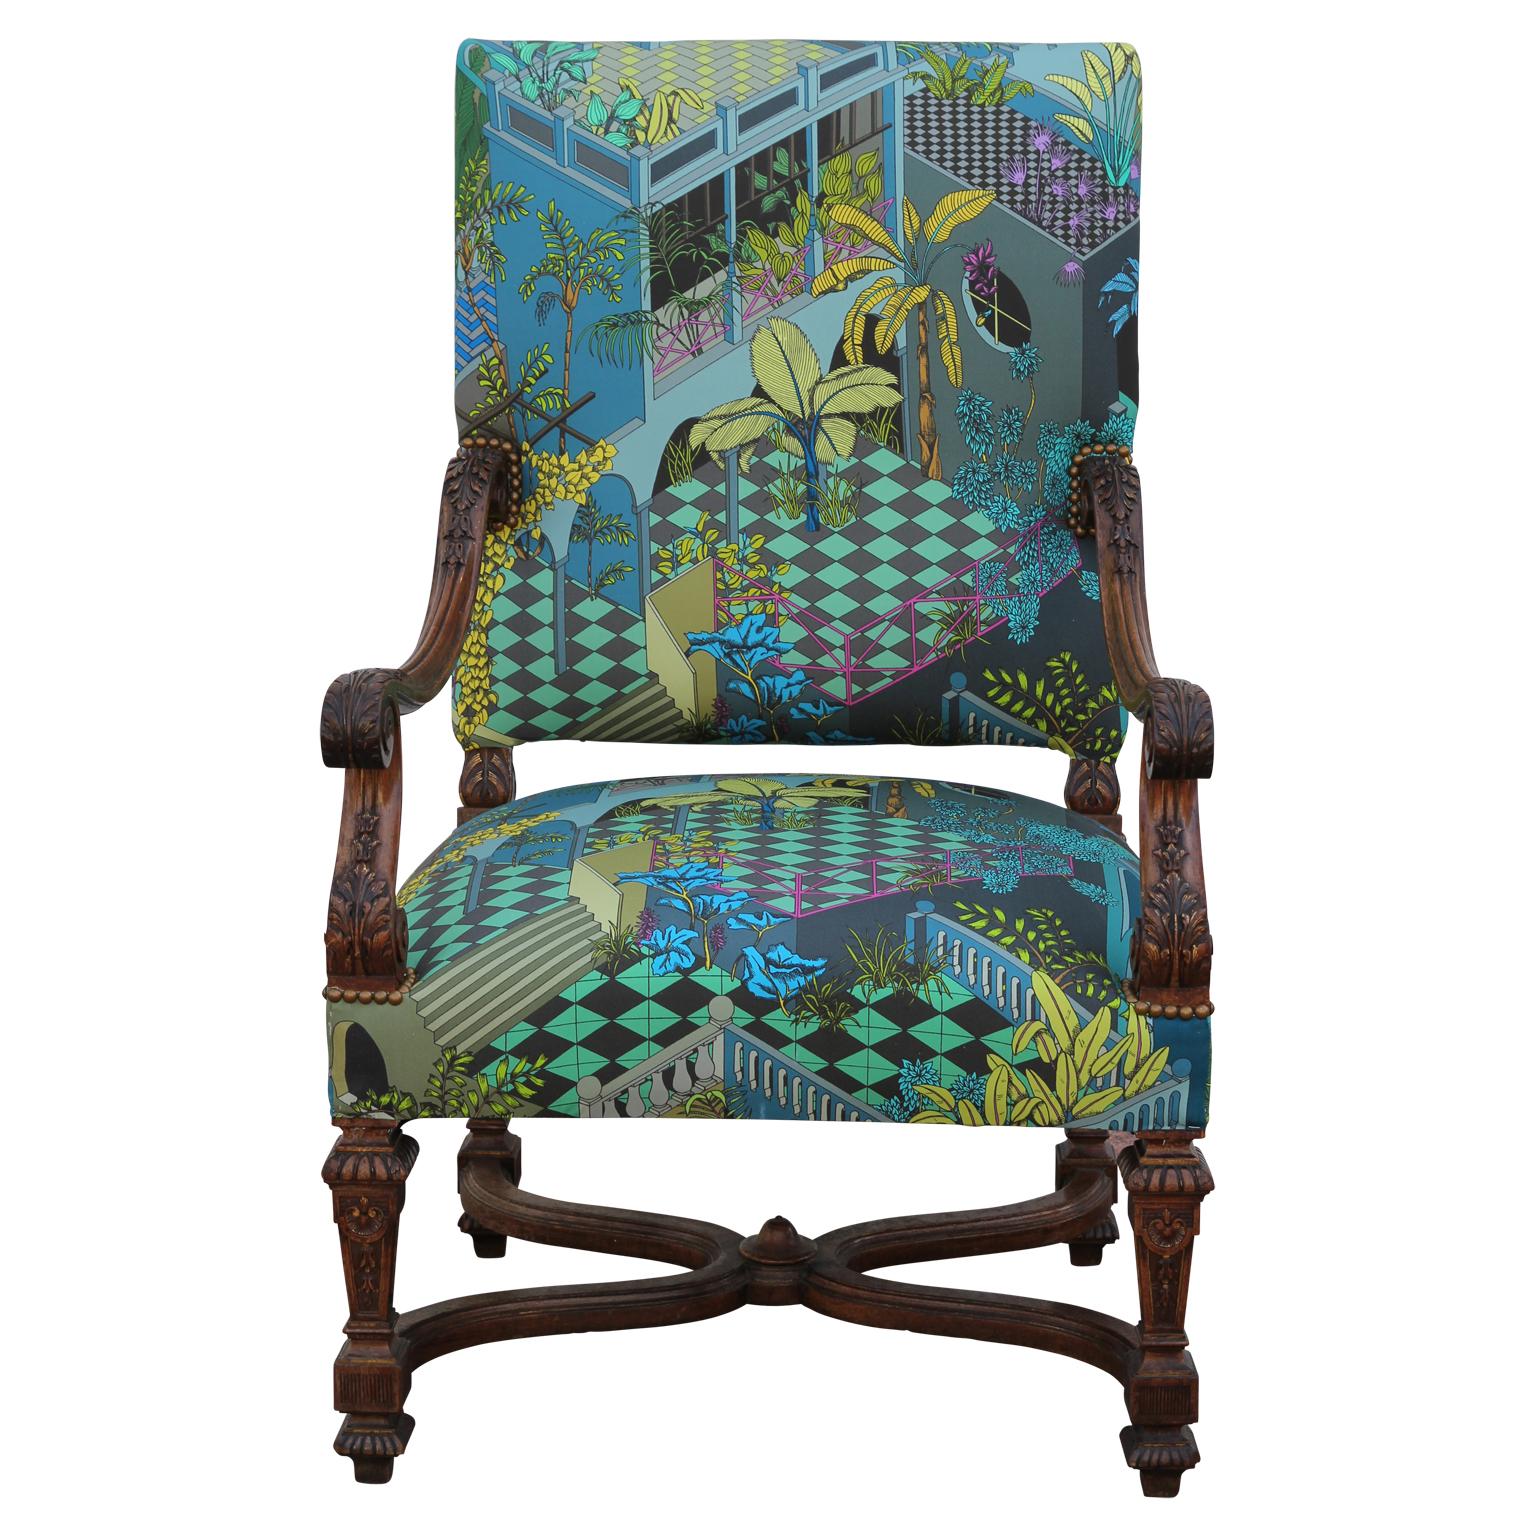 Beautiful pair of Louis the XV style French armchairs with custom upholstery featuring a tropical geometric pattern by Cole & Sons. The deco design of Miami, with its leafy palms and colonnades, creates a conversational element to any interior. The